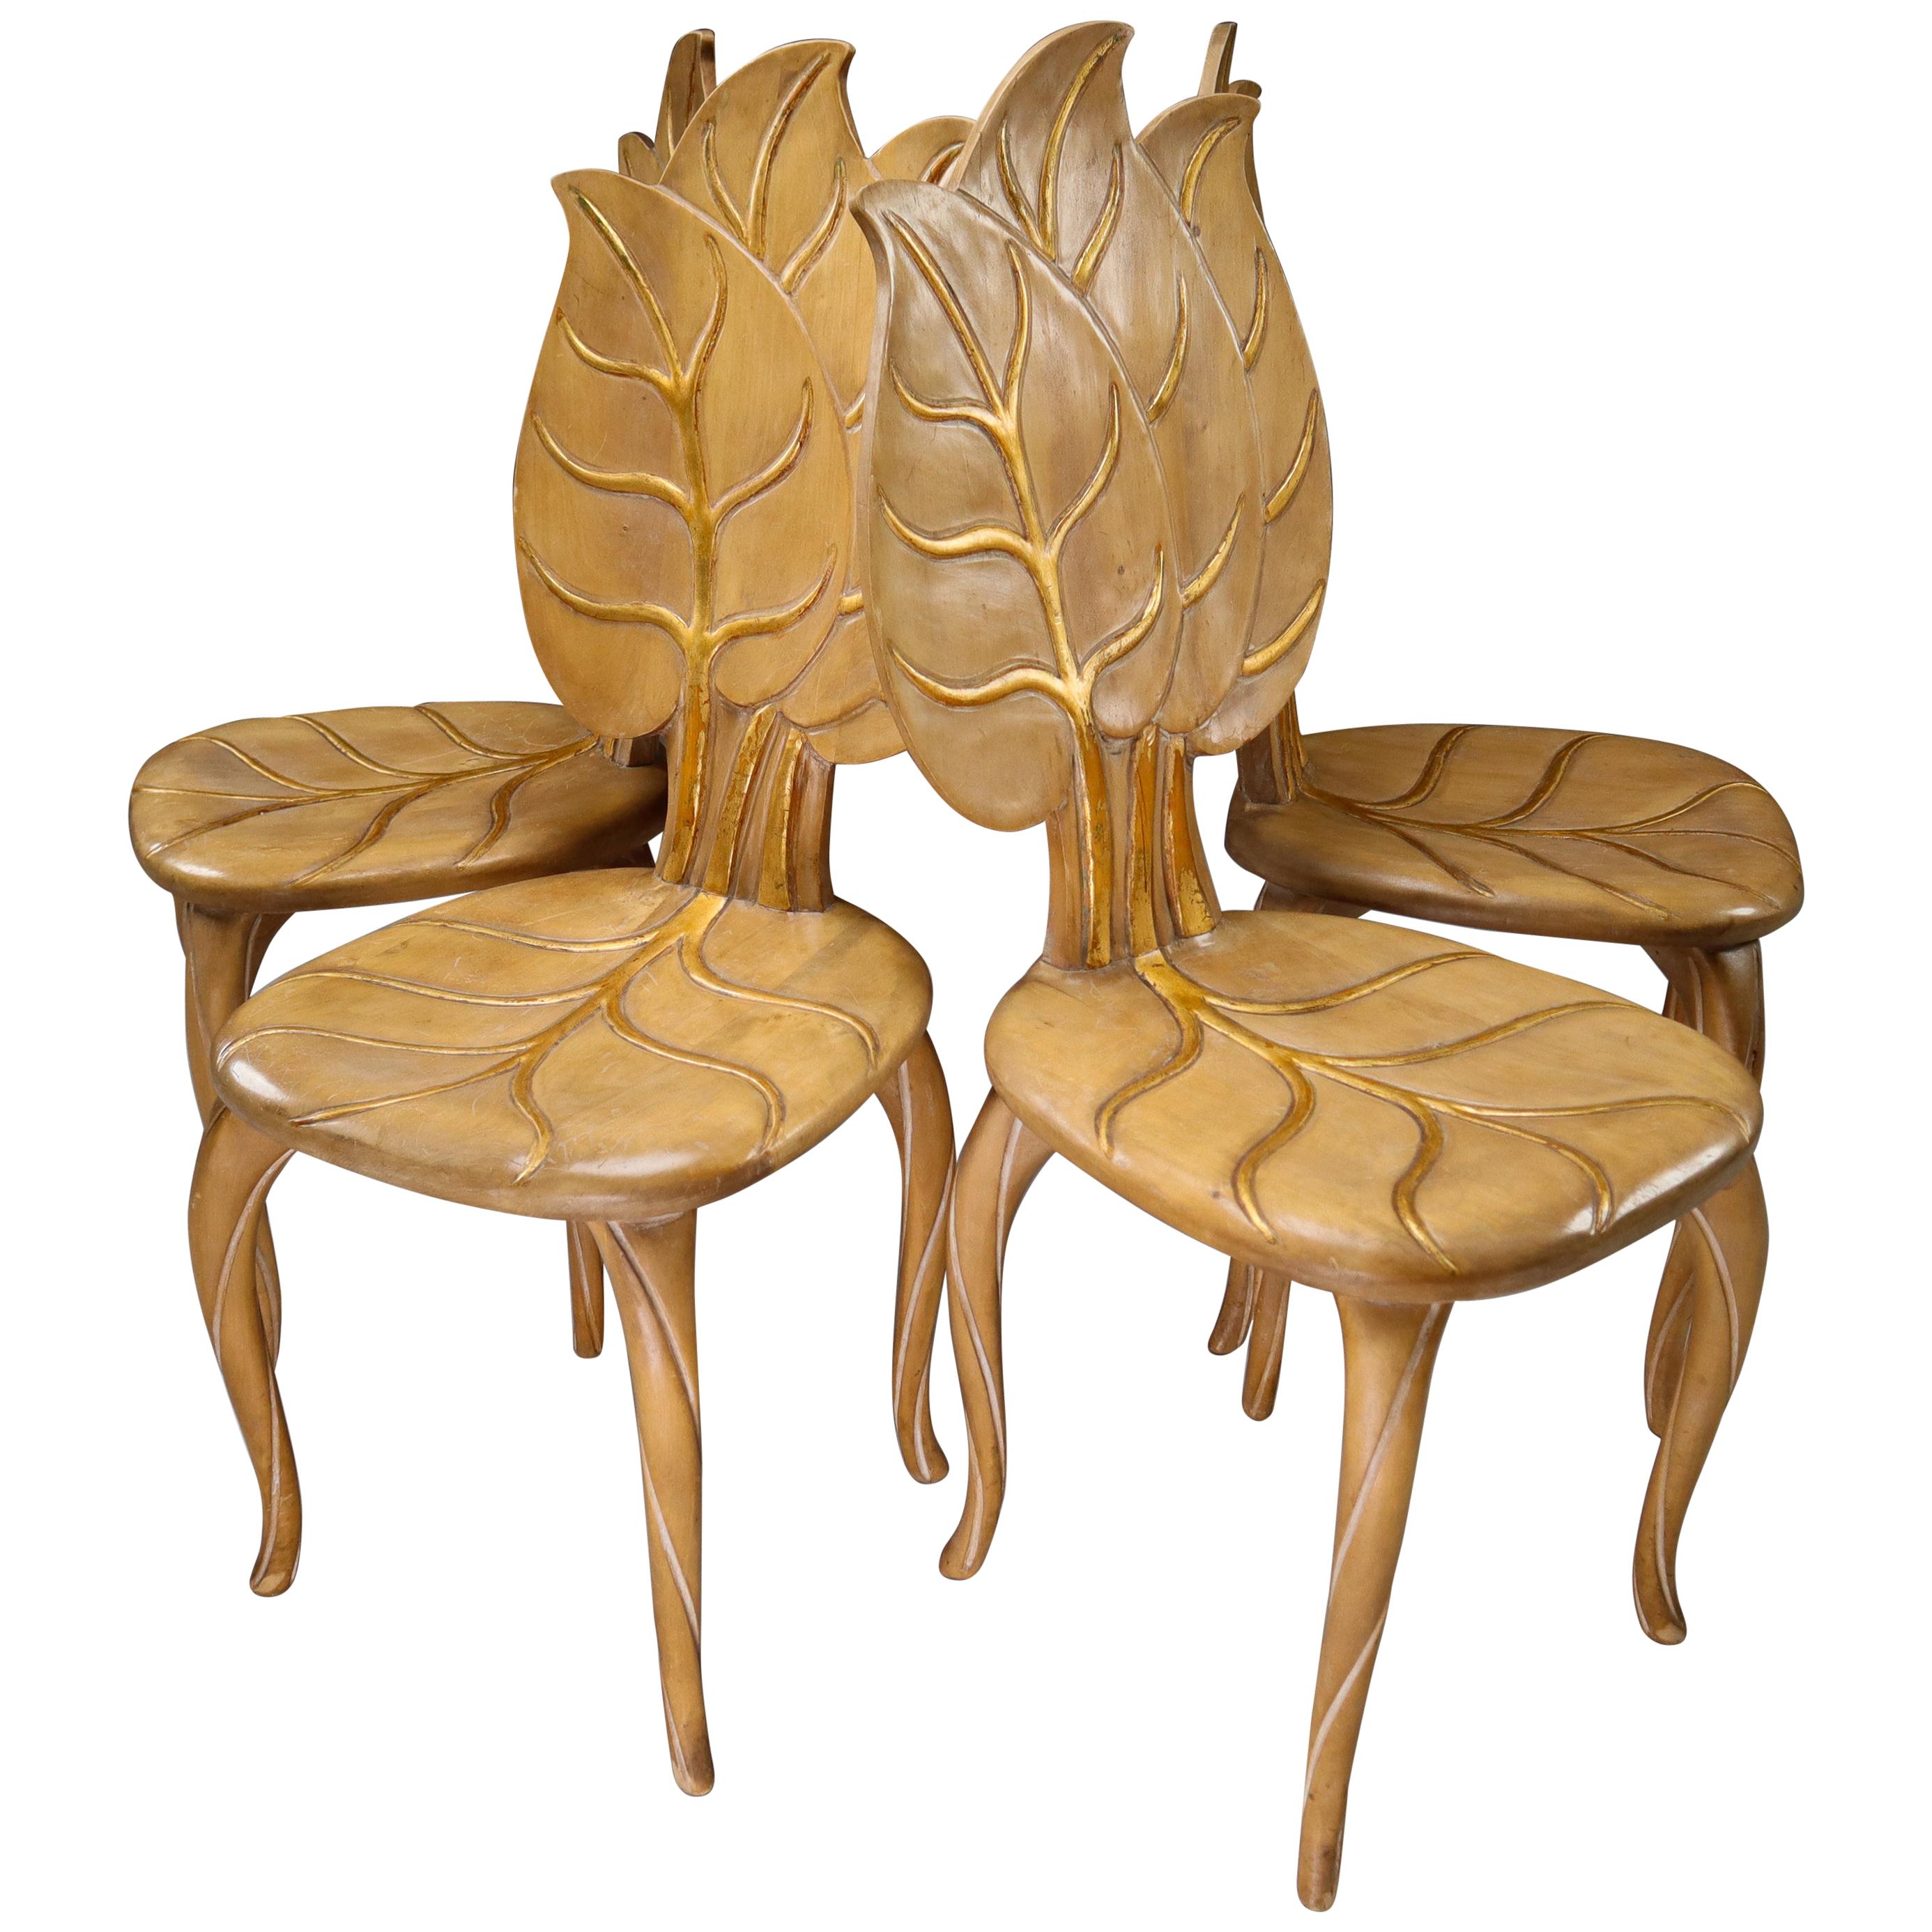 Bartolozzi & Maioli Wooden and Gold Leaf Chairs, Italy, 1970s